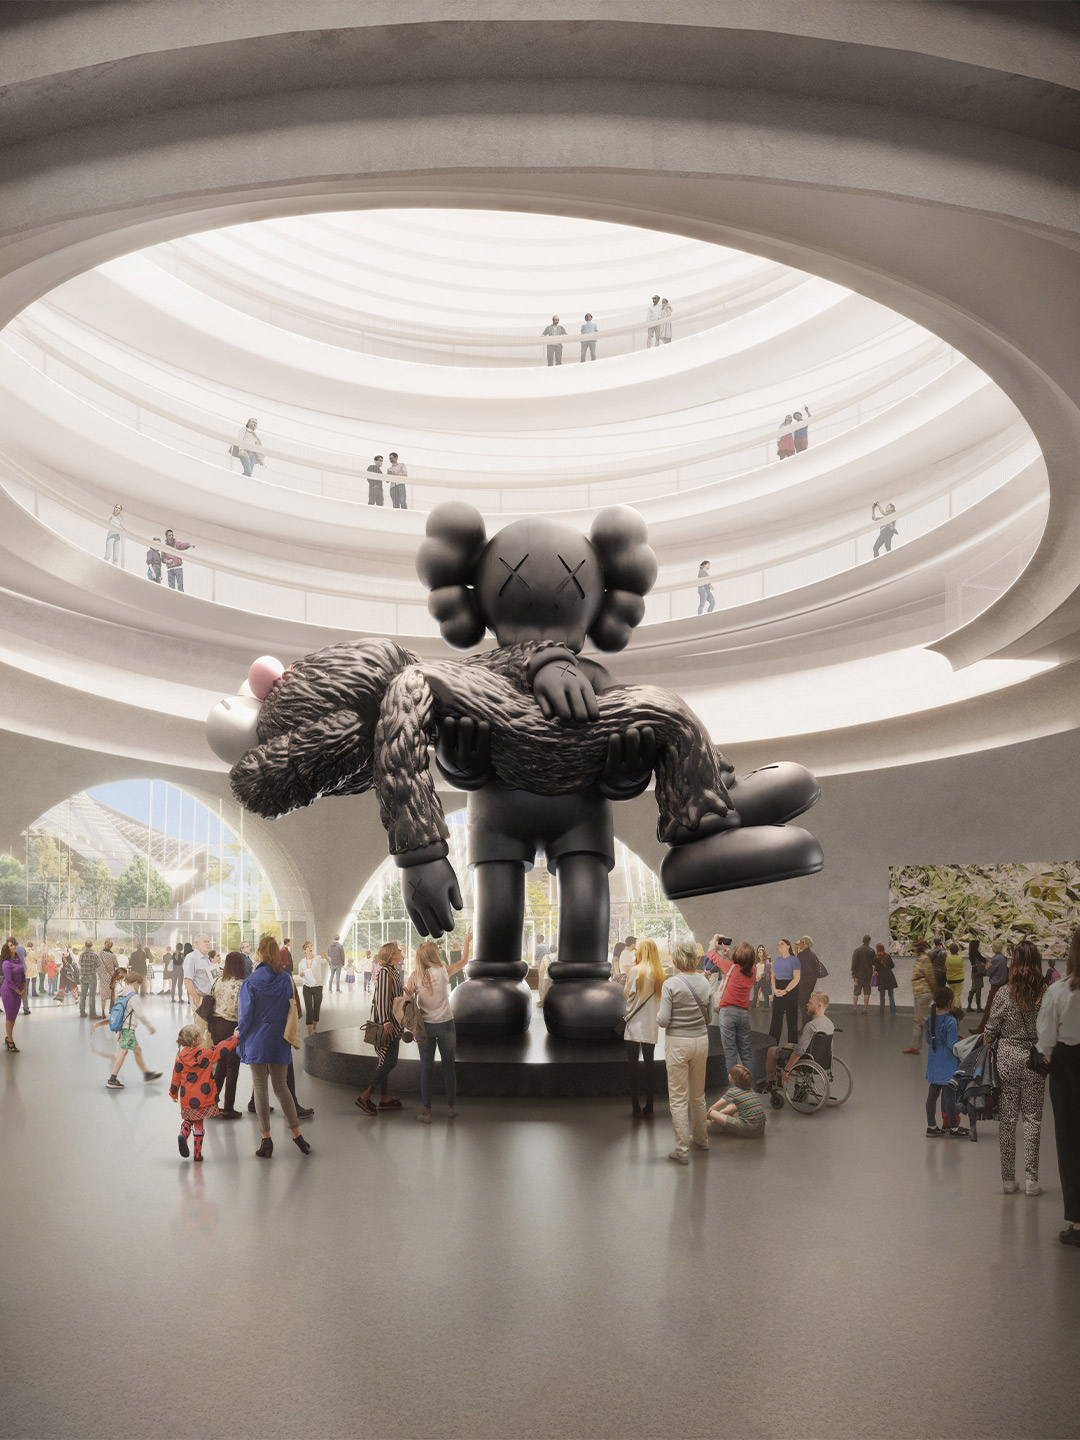 Winning design for NGV Contemporary unveiled by a team led by Angelo Candalepas and Associates